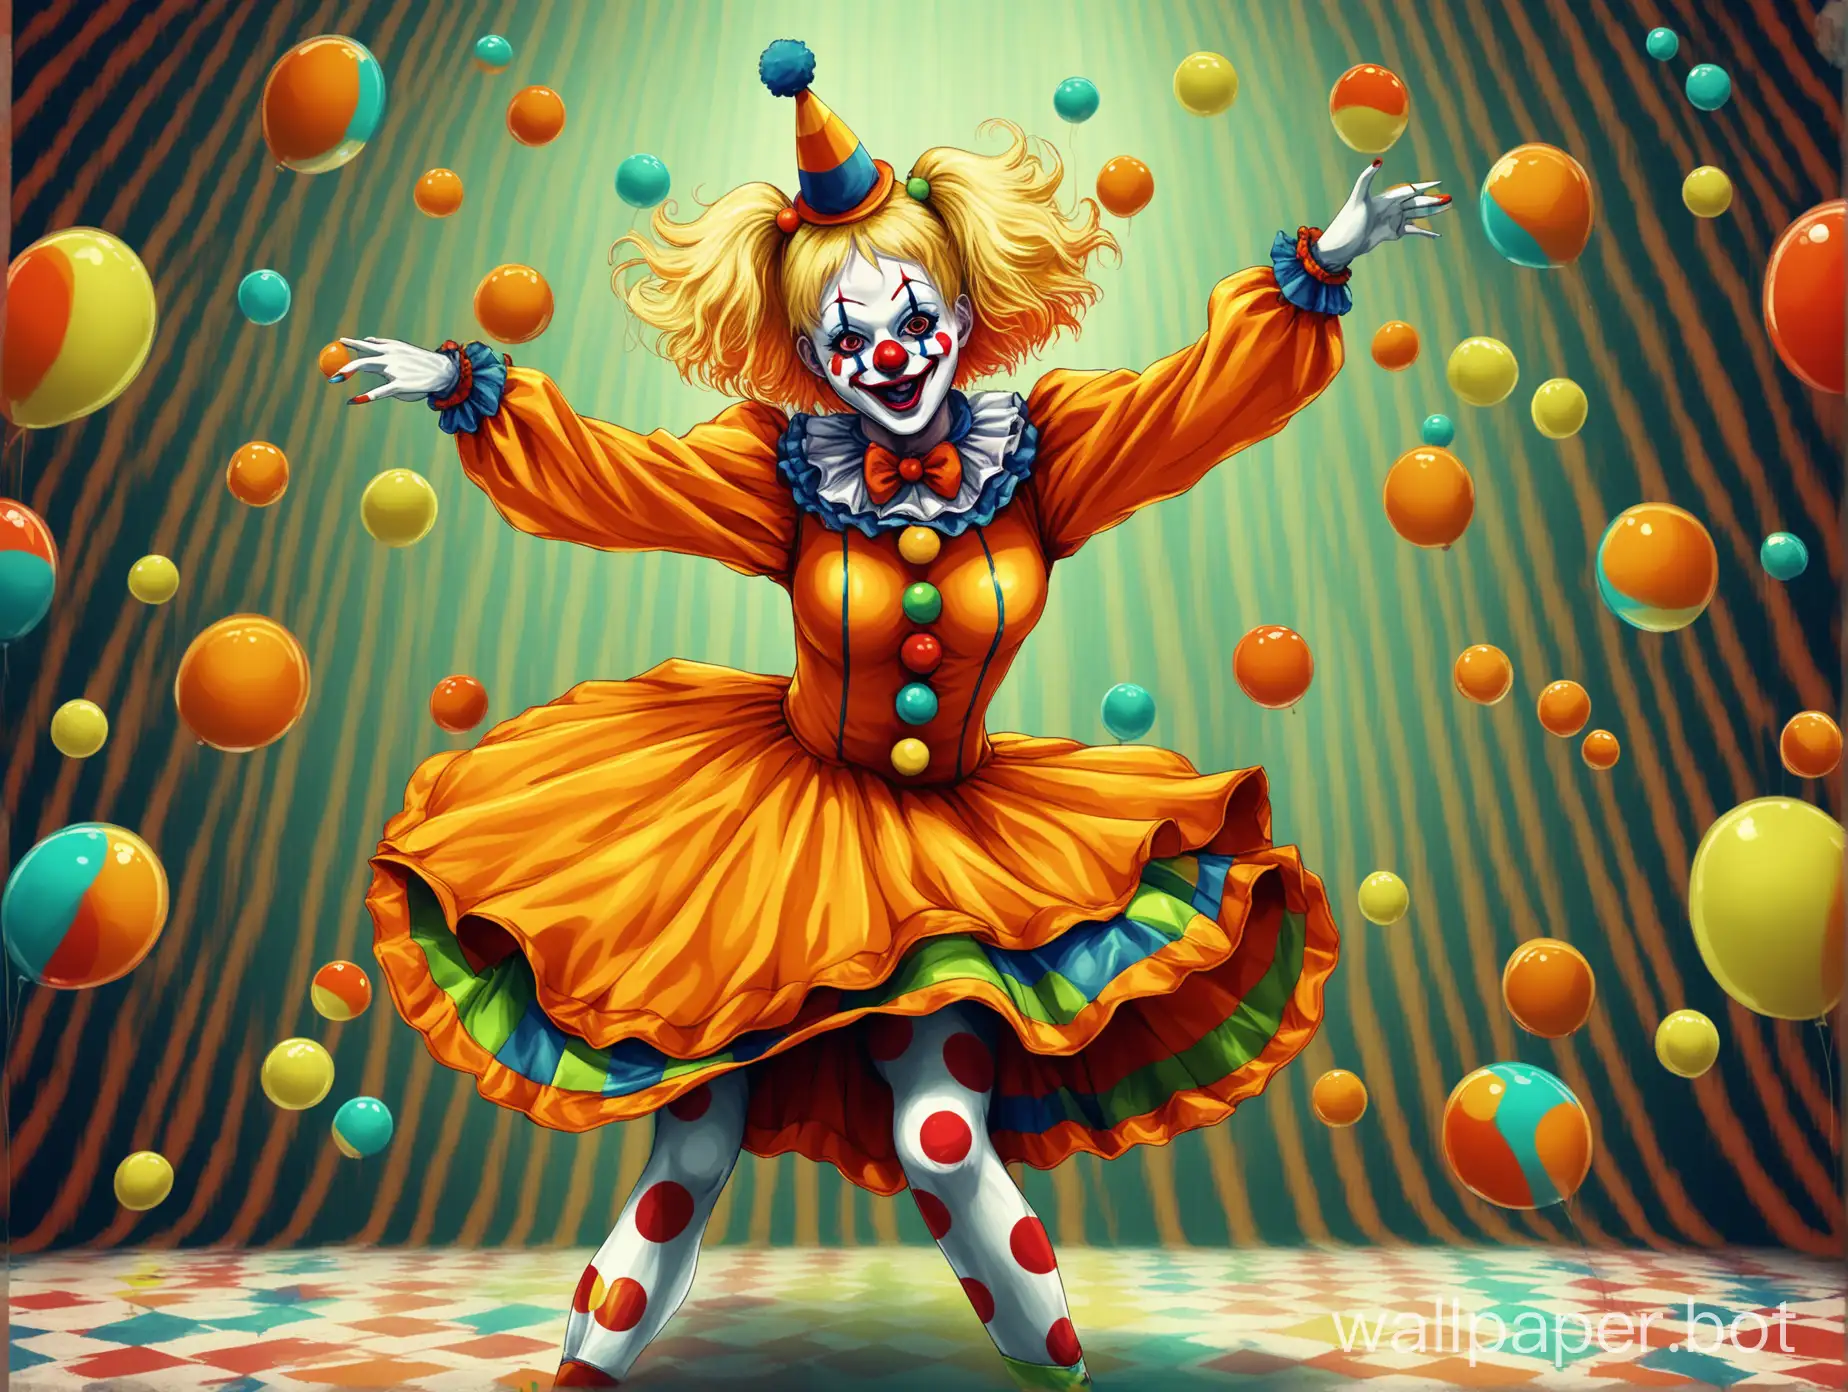 a clown woman is dancing, she has flowing blonde hair and is wearing a orange themed clown costume. she is not scary, and actually looks very cute. trippy acidic background